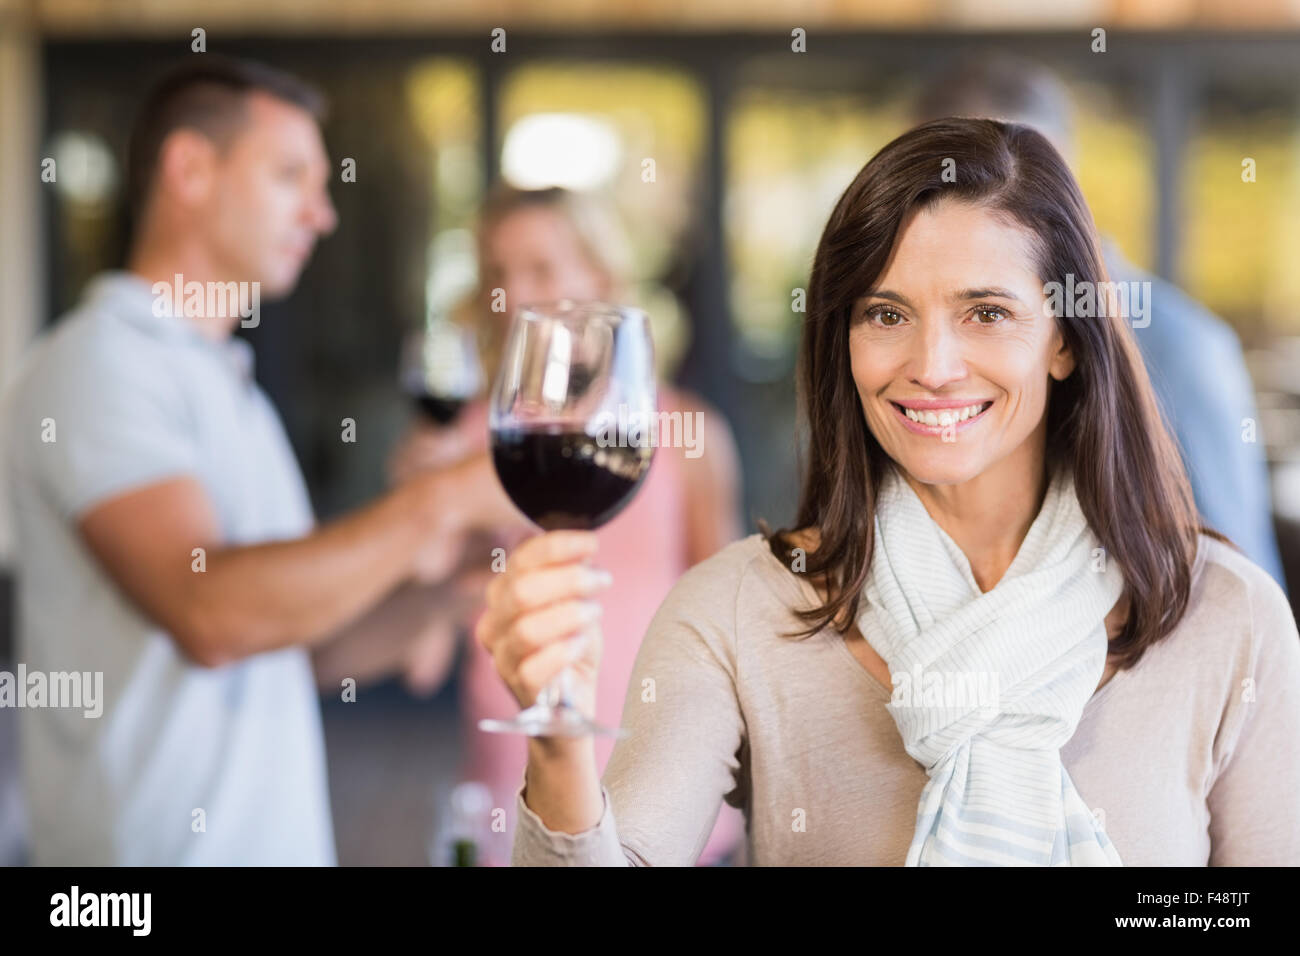 Brunette woman with wineglass in front of group doing wine tasting Stock Photo